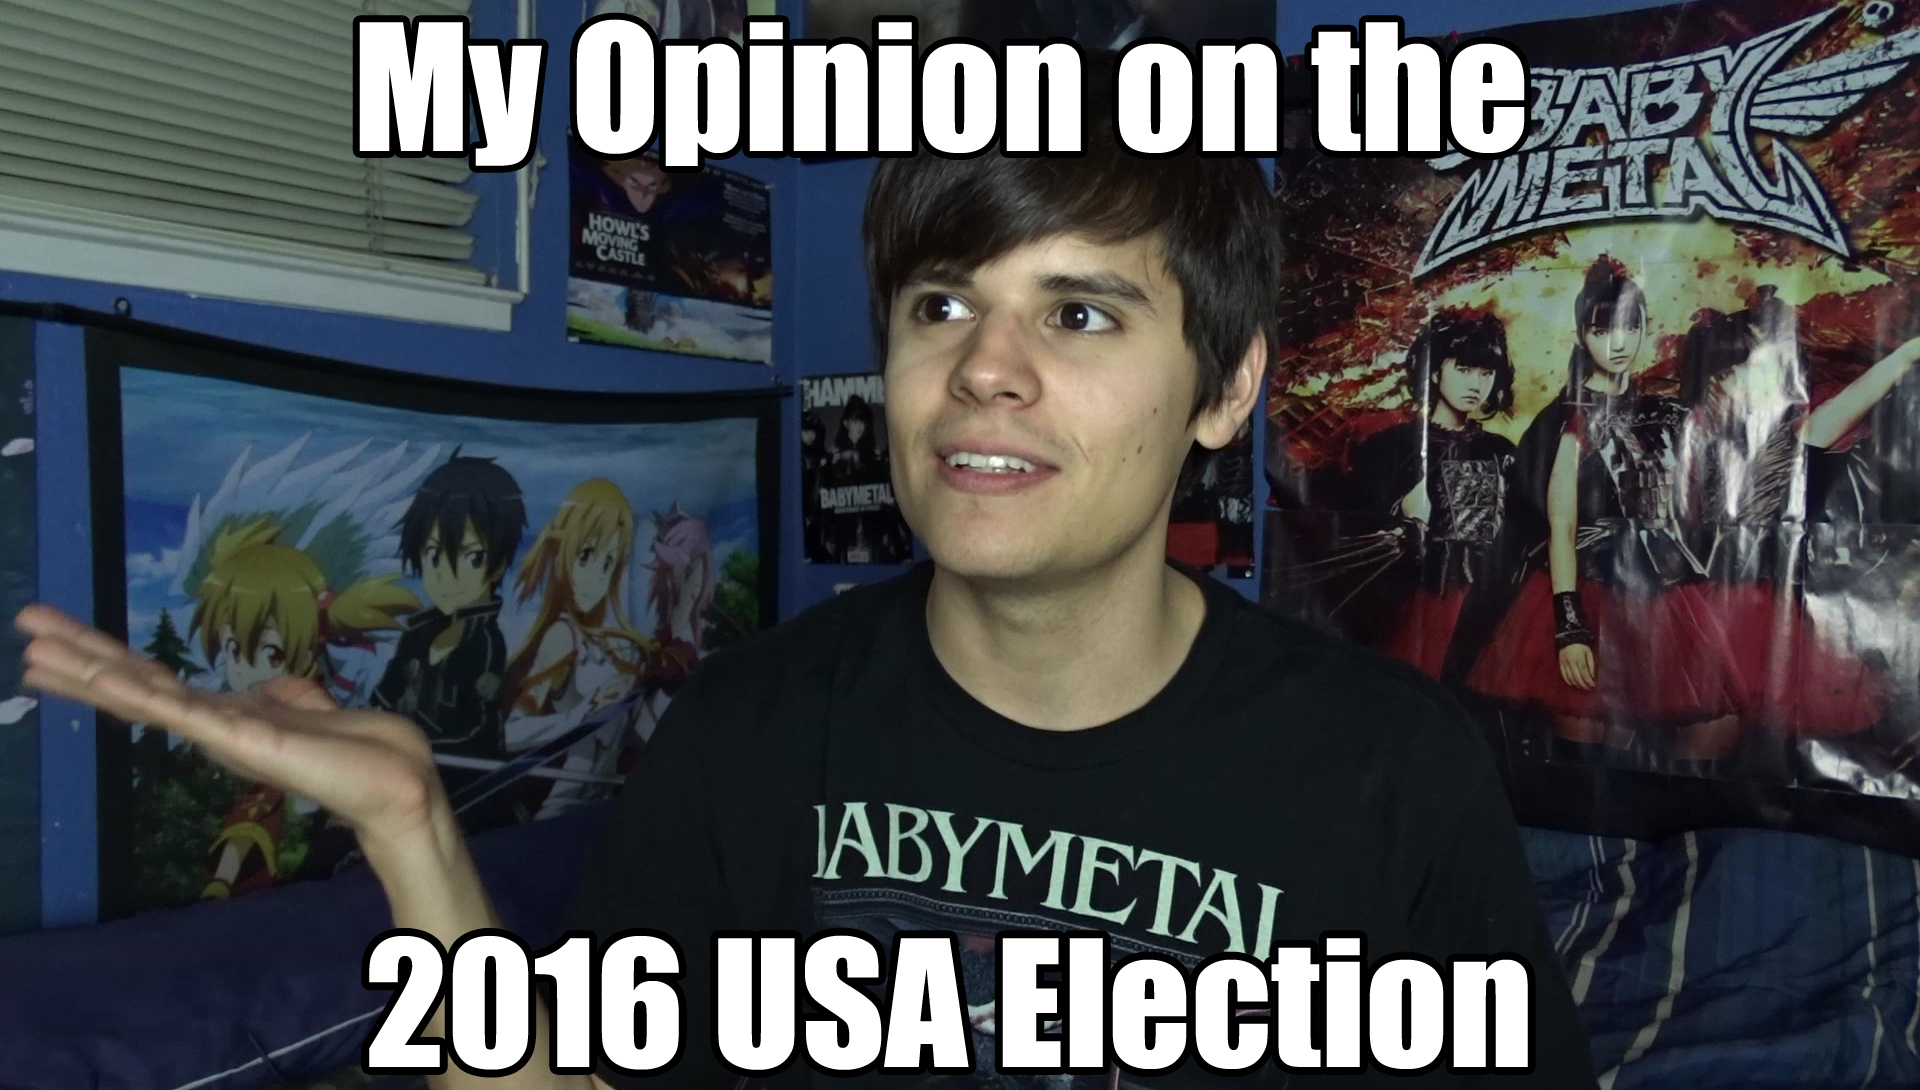 My Thoughts on the 2016 USA Election